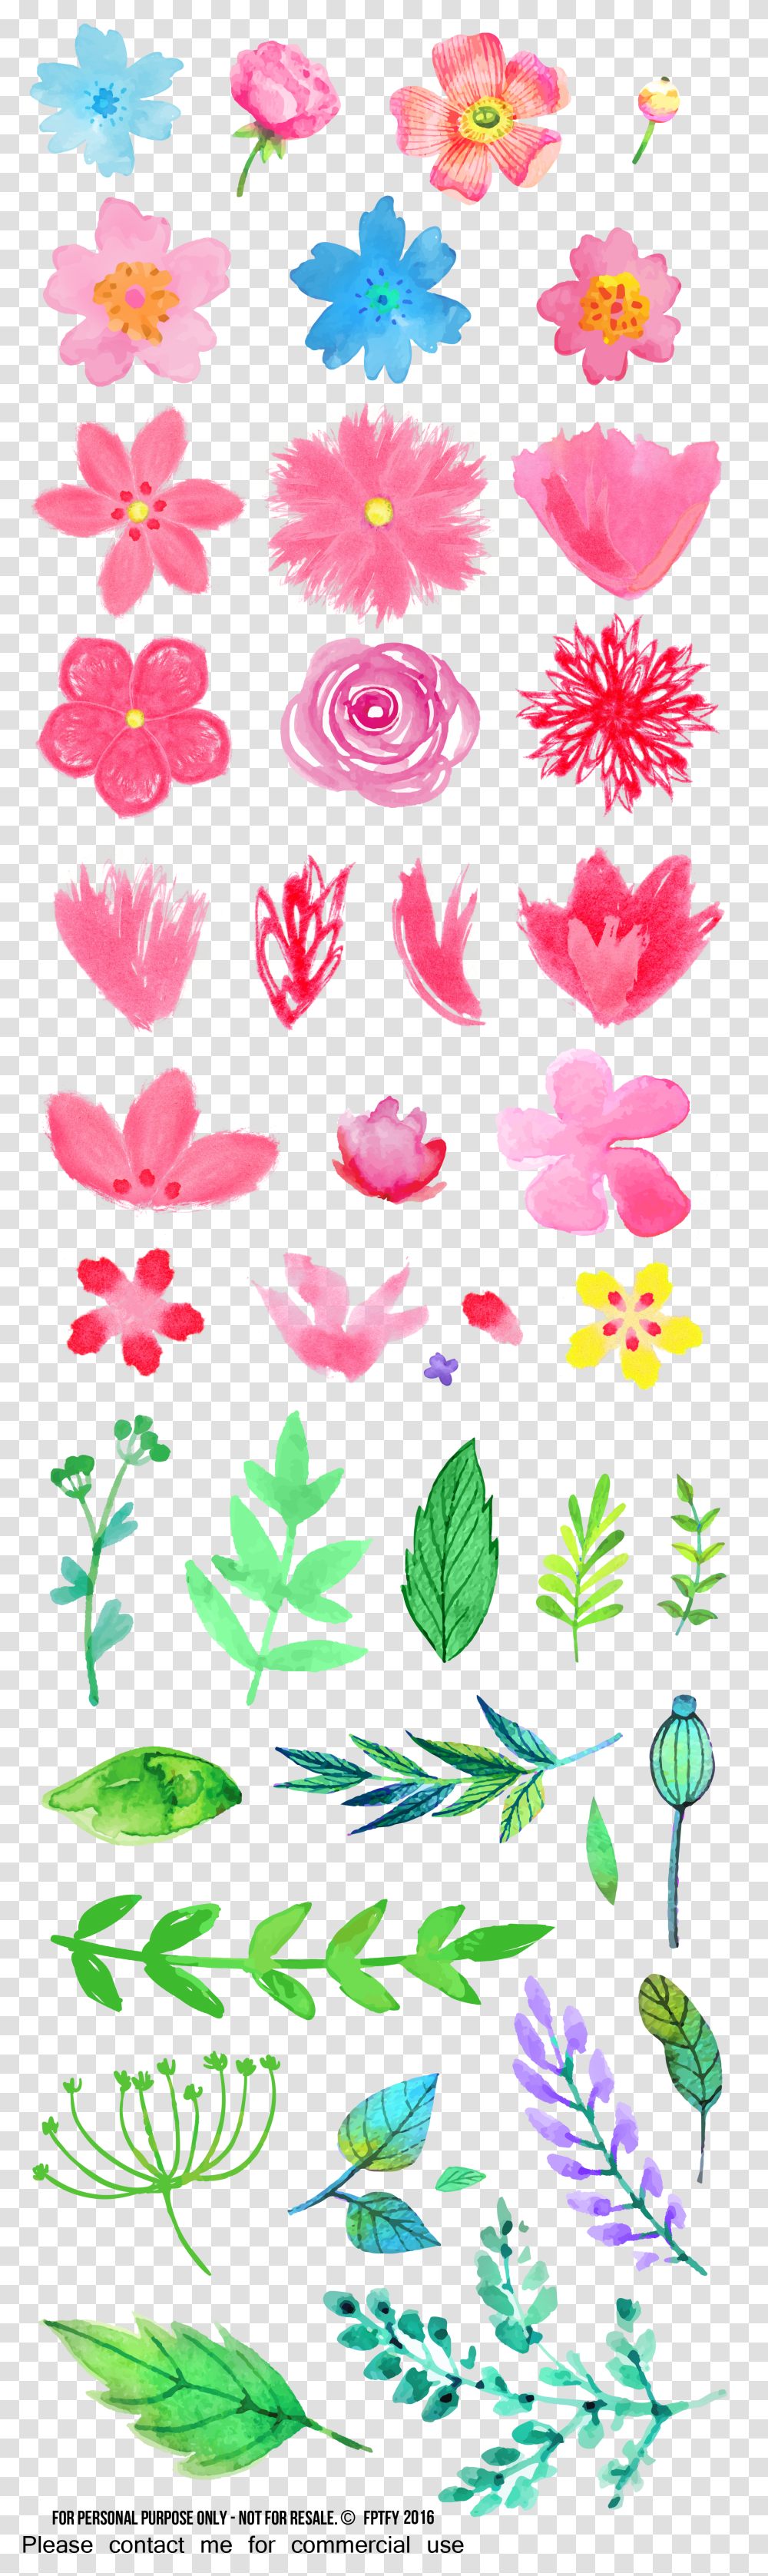 Free Watercolor Flower Clipart Watercolor Clipart Free Transparent Png